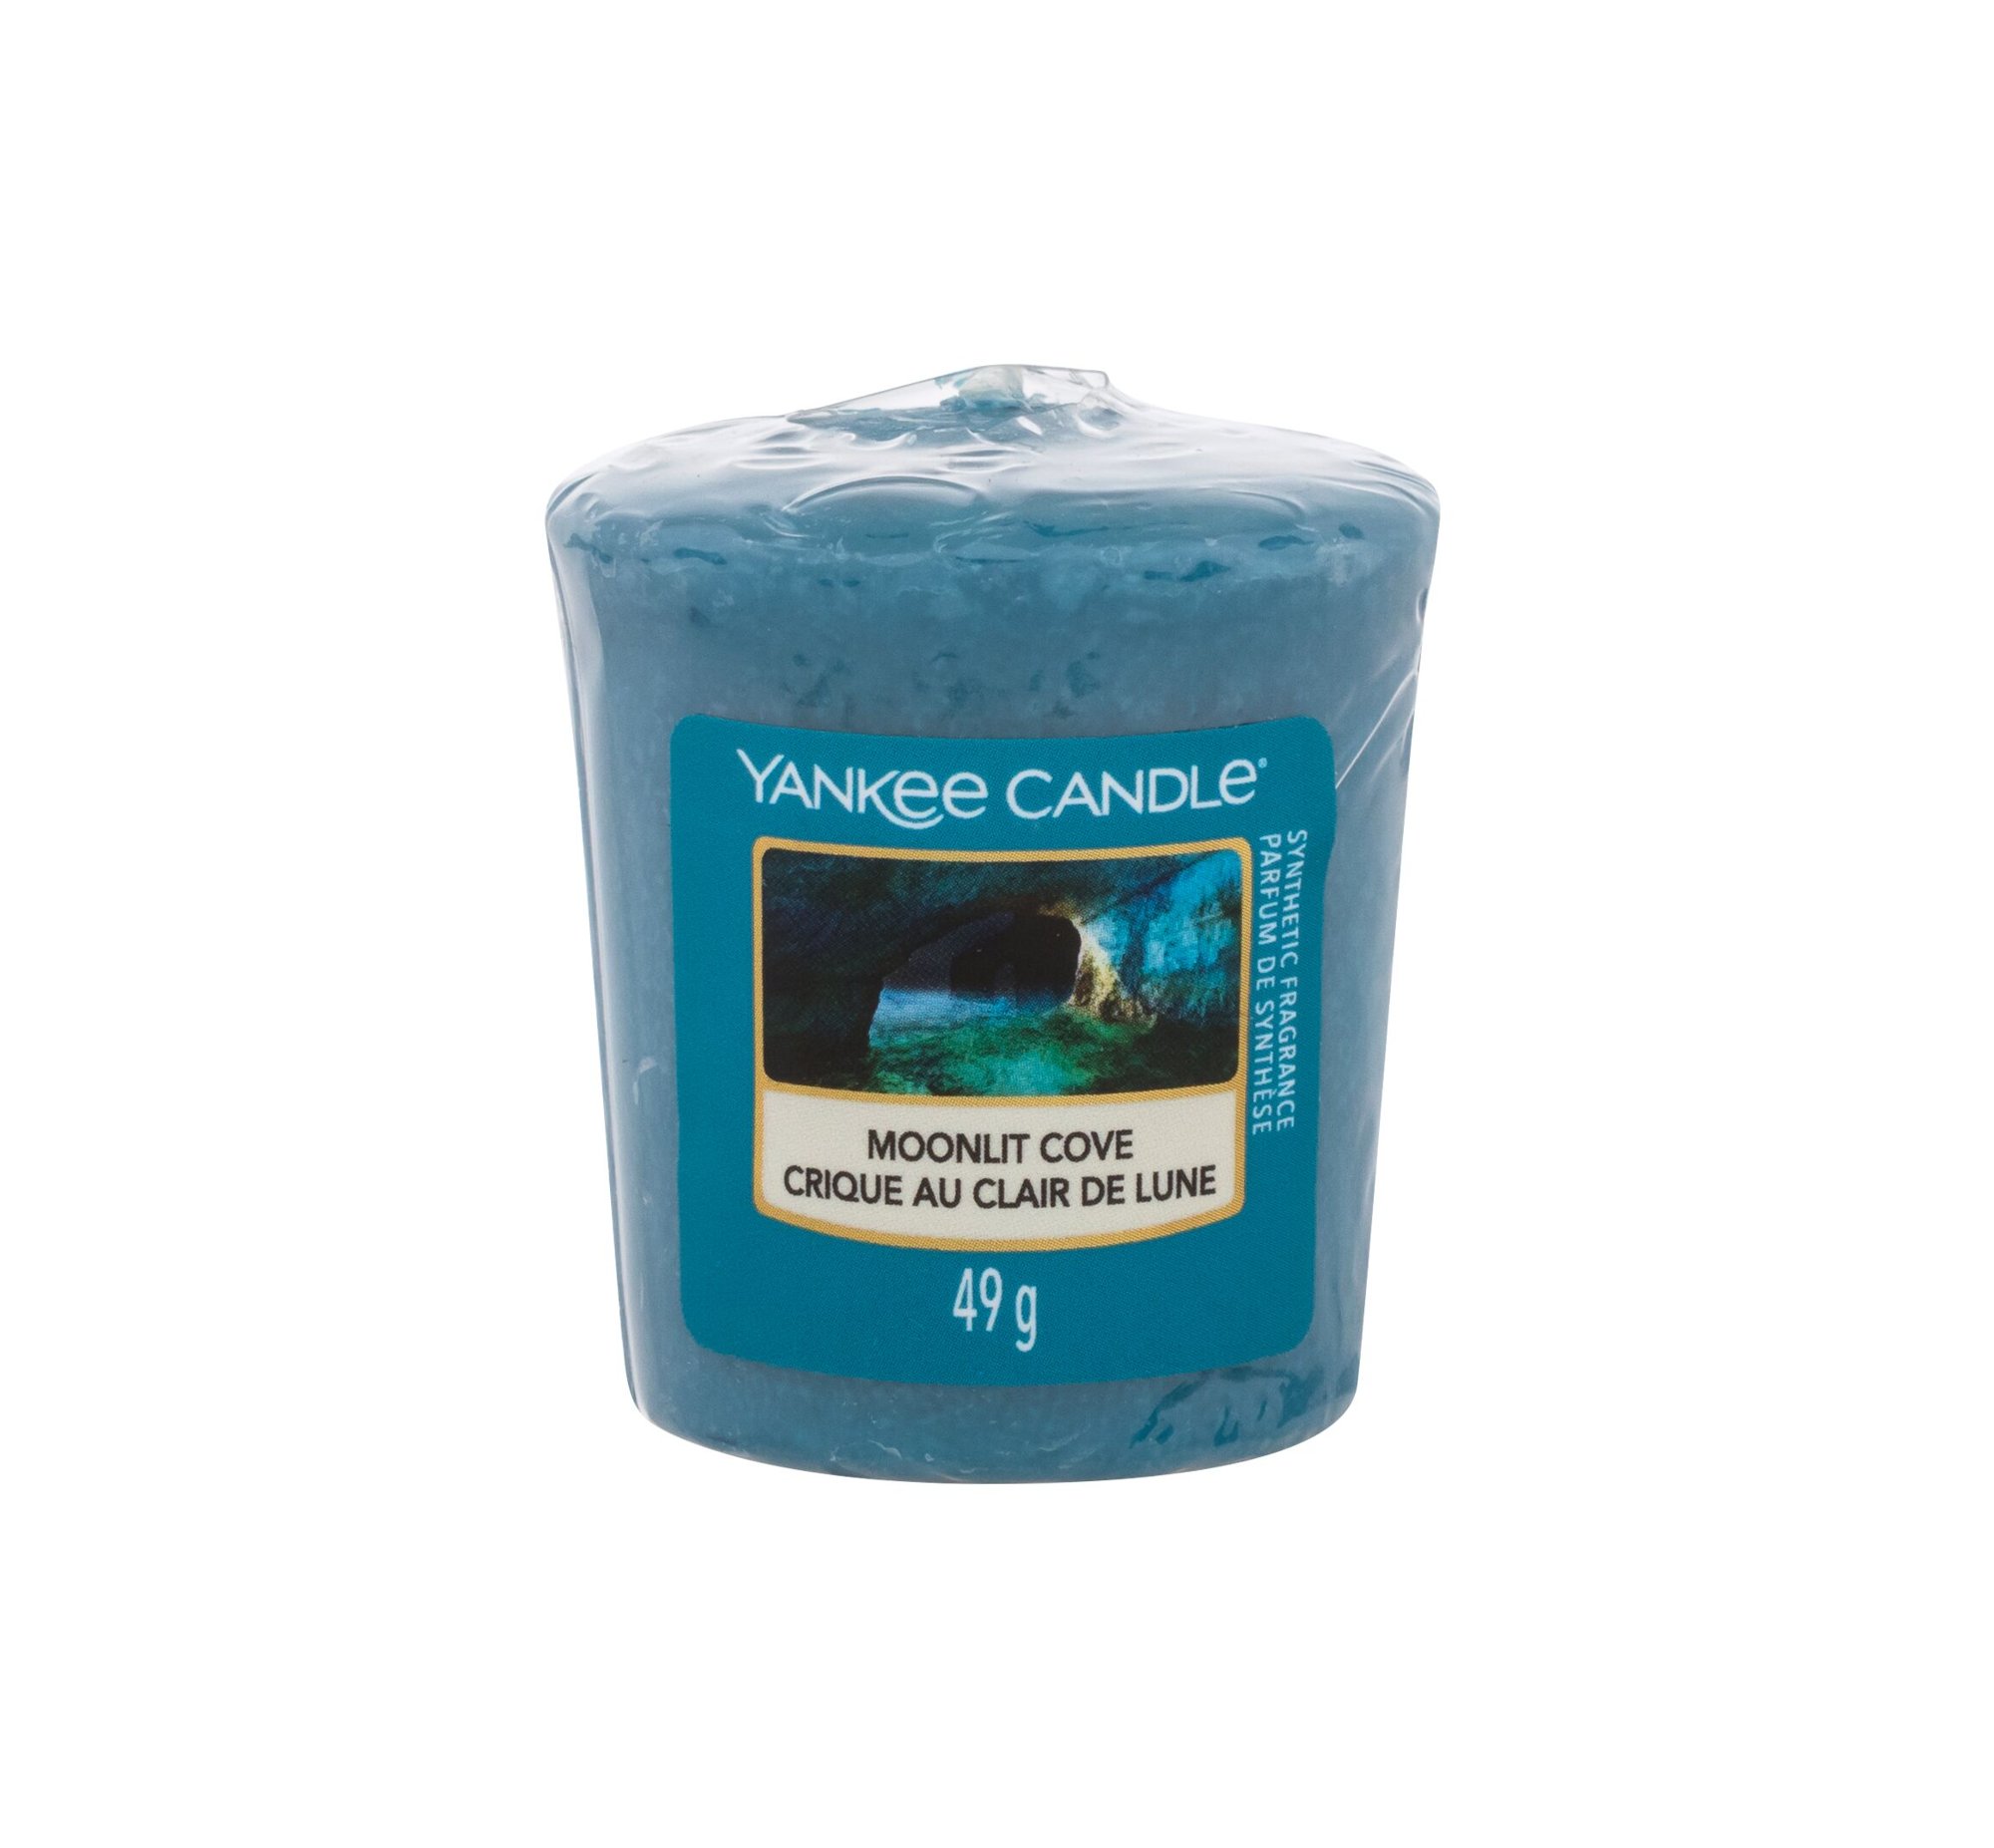 Yankee Candle Moonlit Cove 49g Kvepalai Unisex Scented Candle